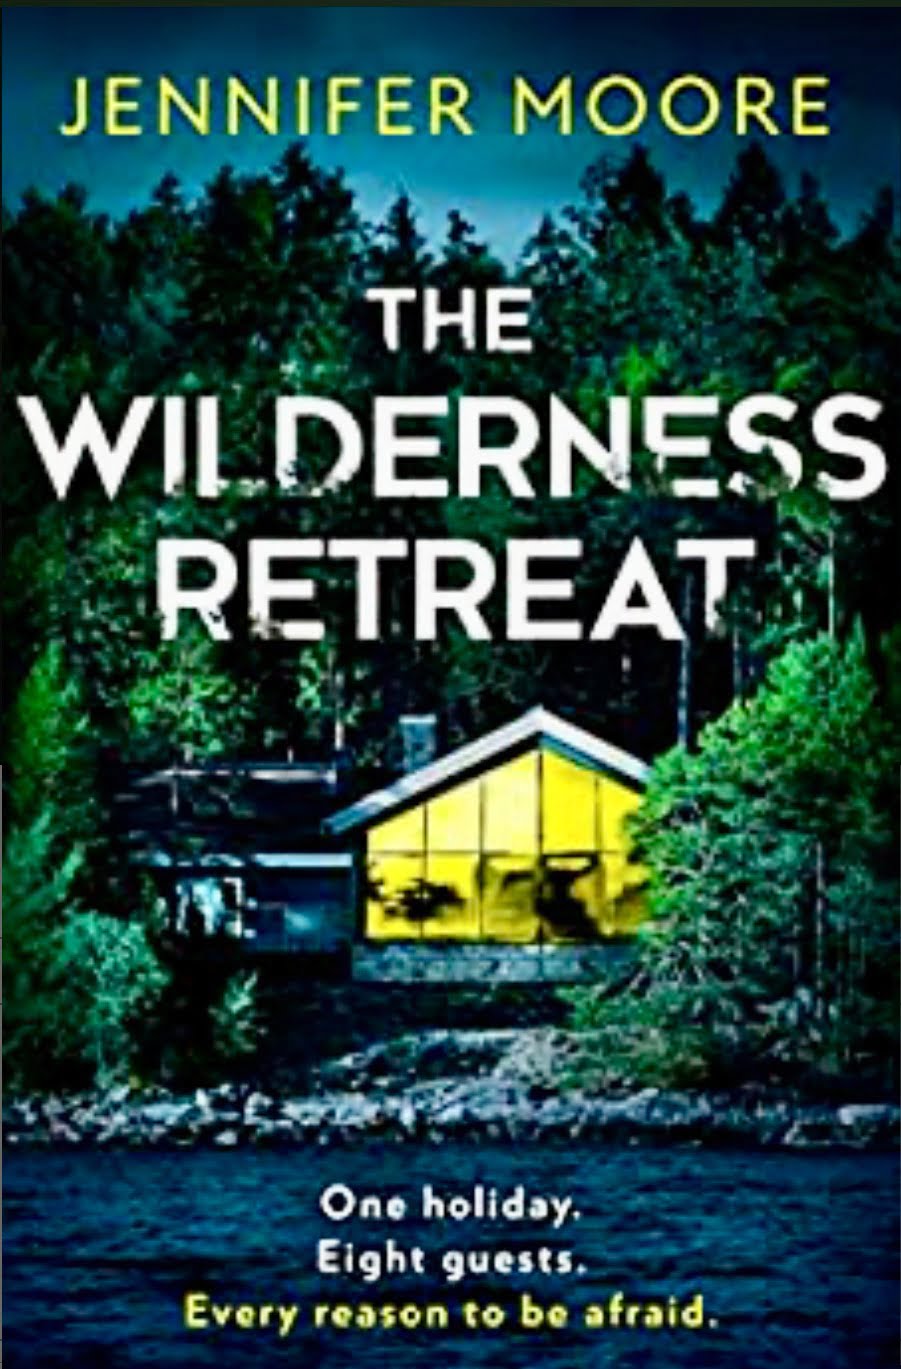 THE WILDERNESS RETREAT BY JENNIFER MOORE – BOOK REVIEW